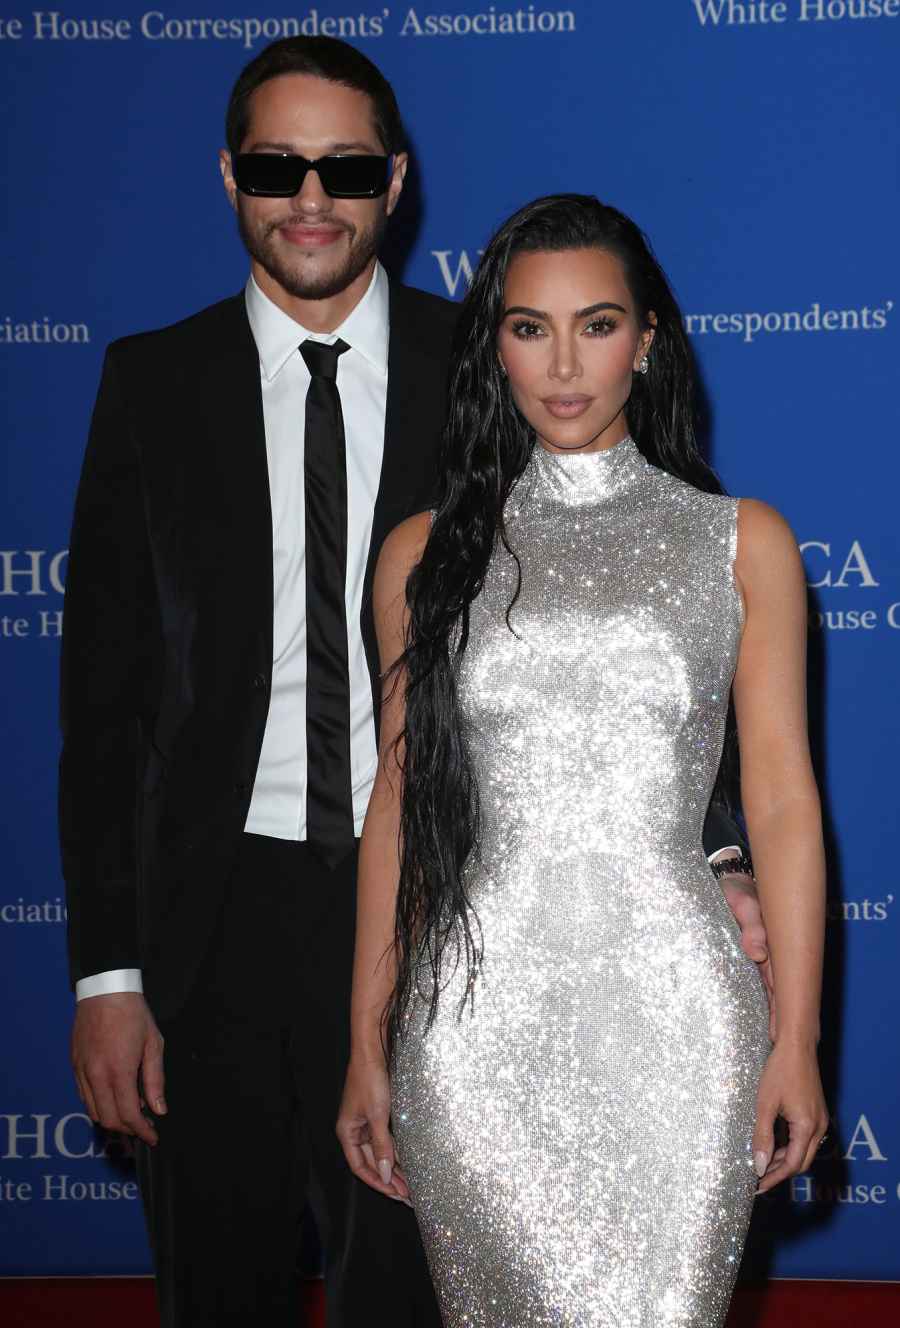 Pete and Kim pose at the White House Correspondents Dinner